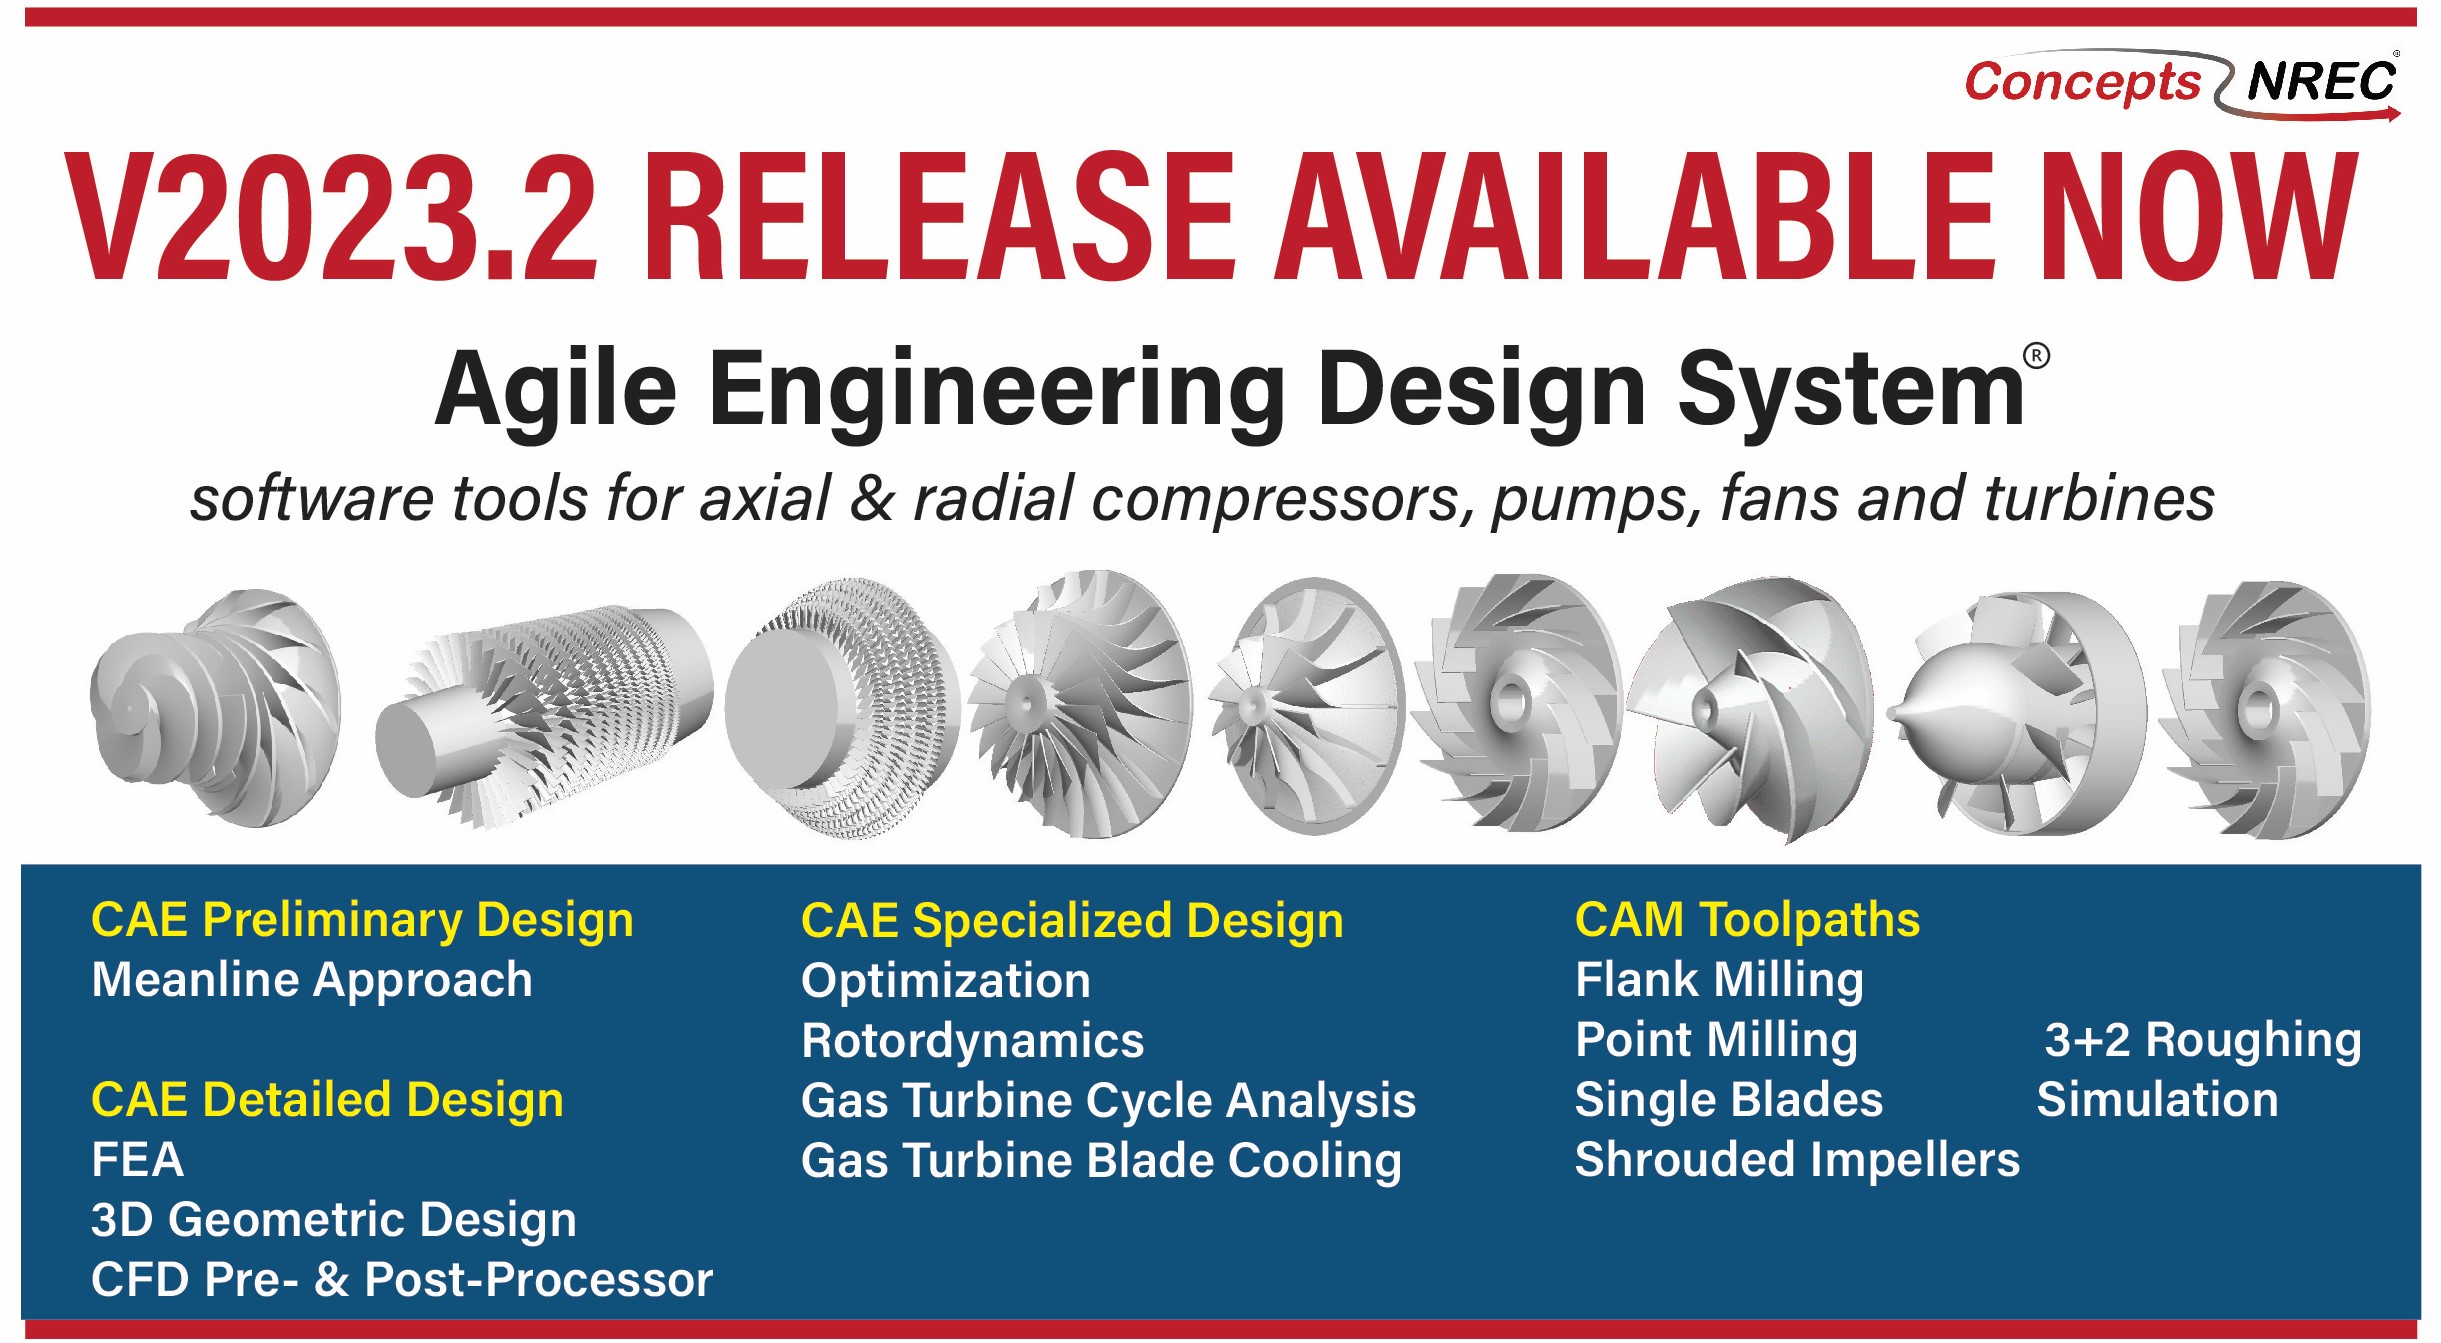 Agile Engineering Design System New Release Available: v2023.2